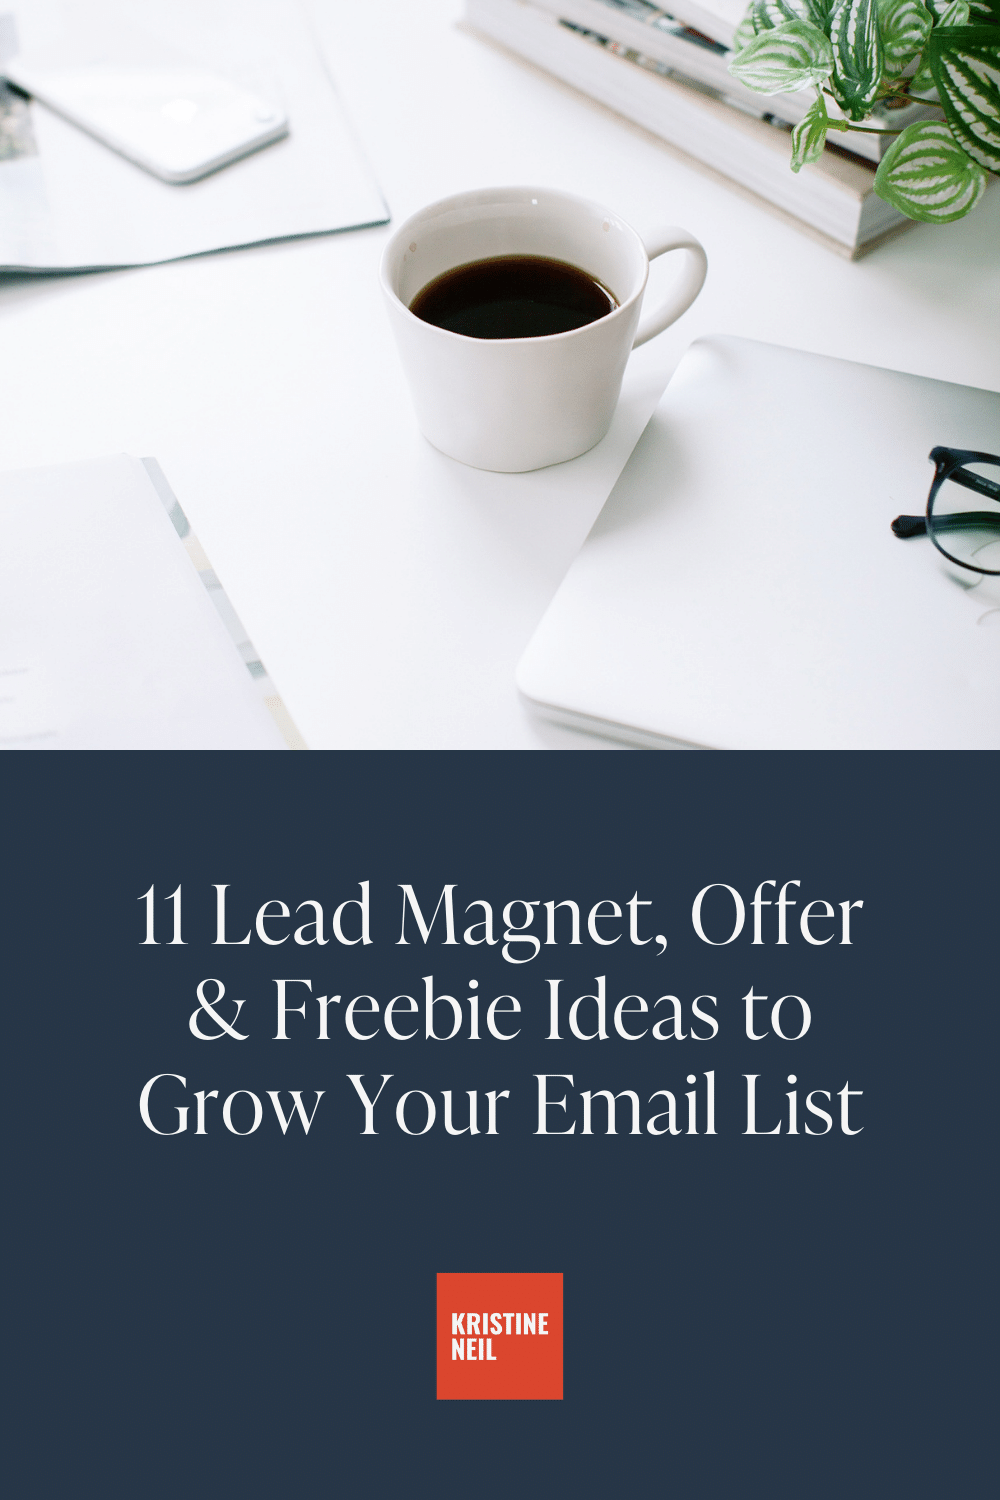 30 Ideas for Freebies + Proven Strategies for Exploding Your Email